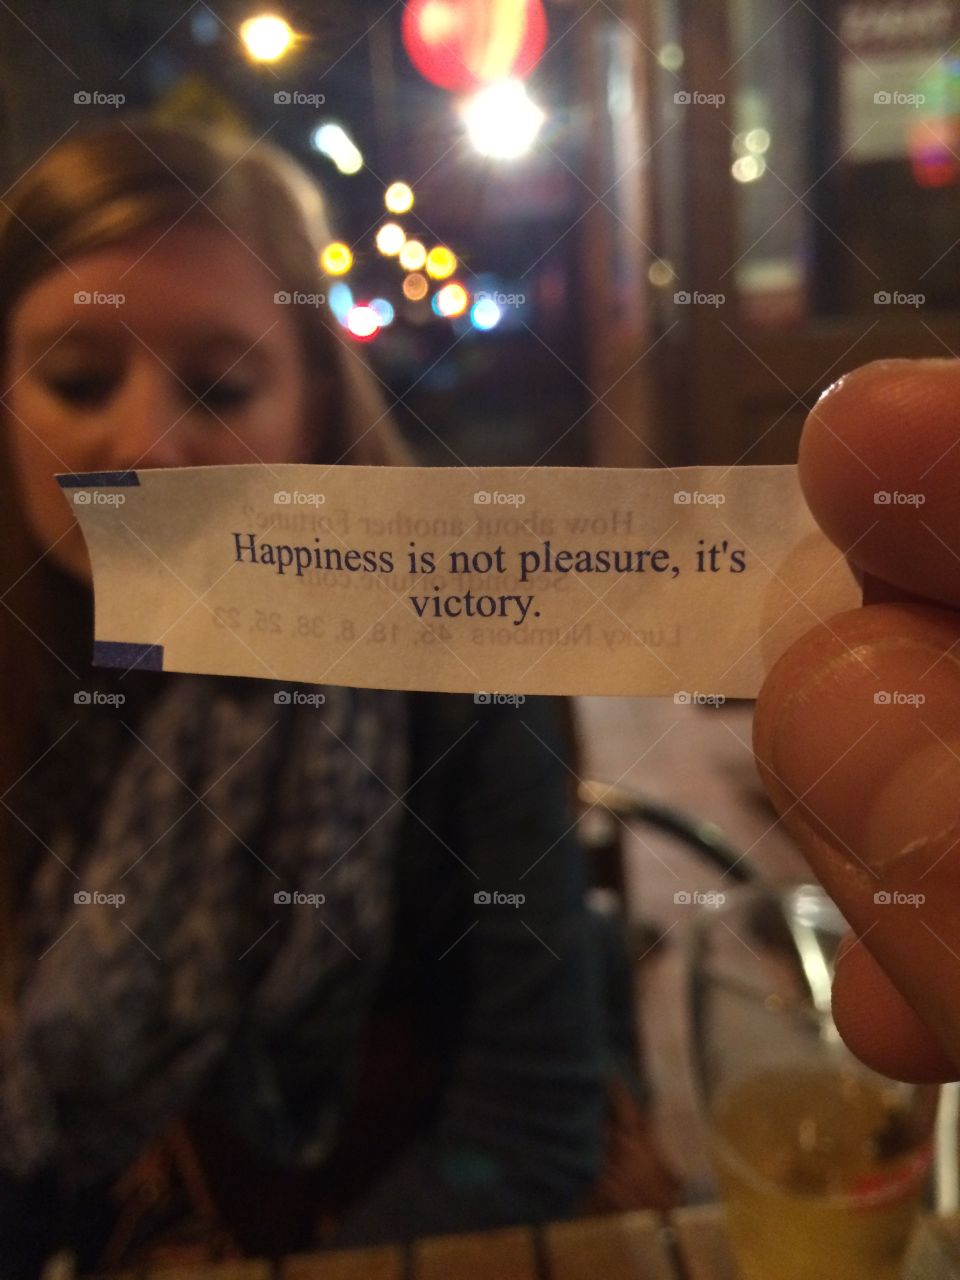 Happiness is not pleasure, it’s victory! Fortune cookie at a Chinese restaurant in New York City.